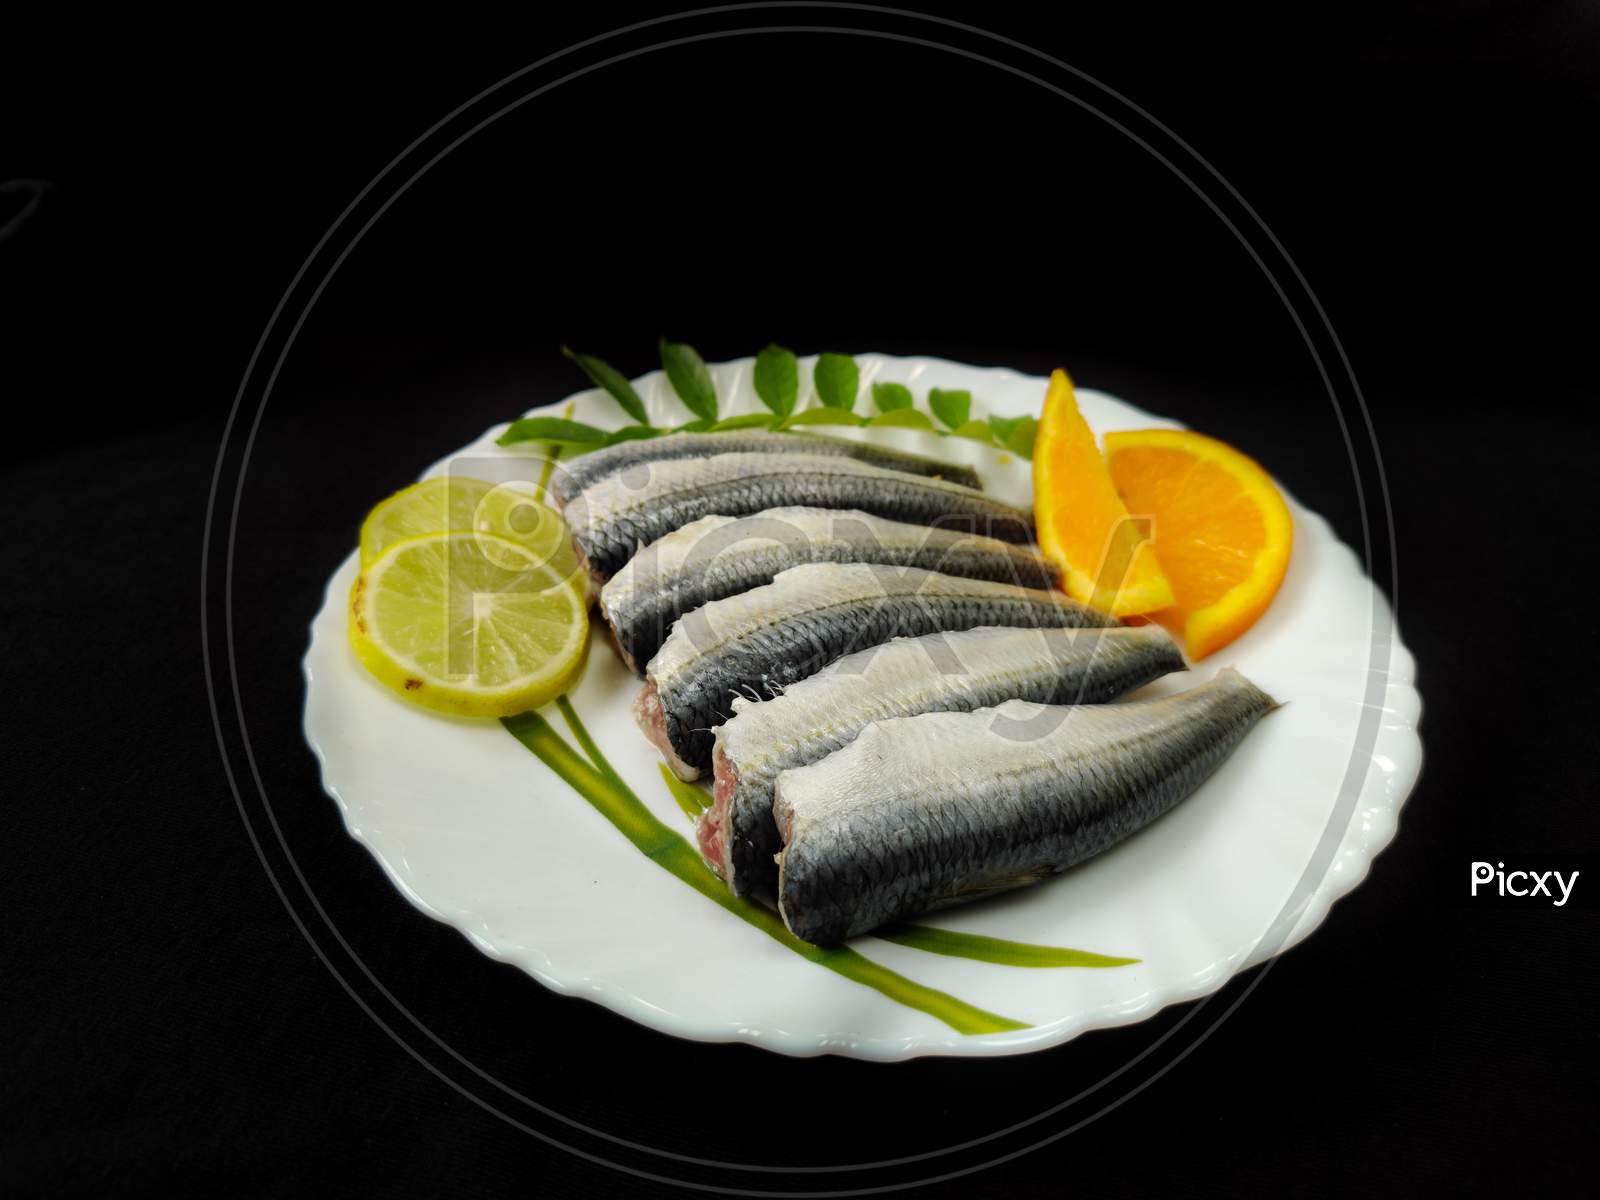 Cleaned And Ready To Cook Fresh Indian Sardine Decorated With Curry Leaves,Lemon Slice And Tomato Slice .Isolated On Black Background.